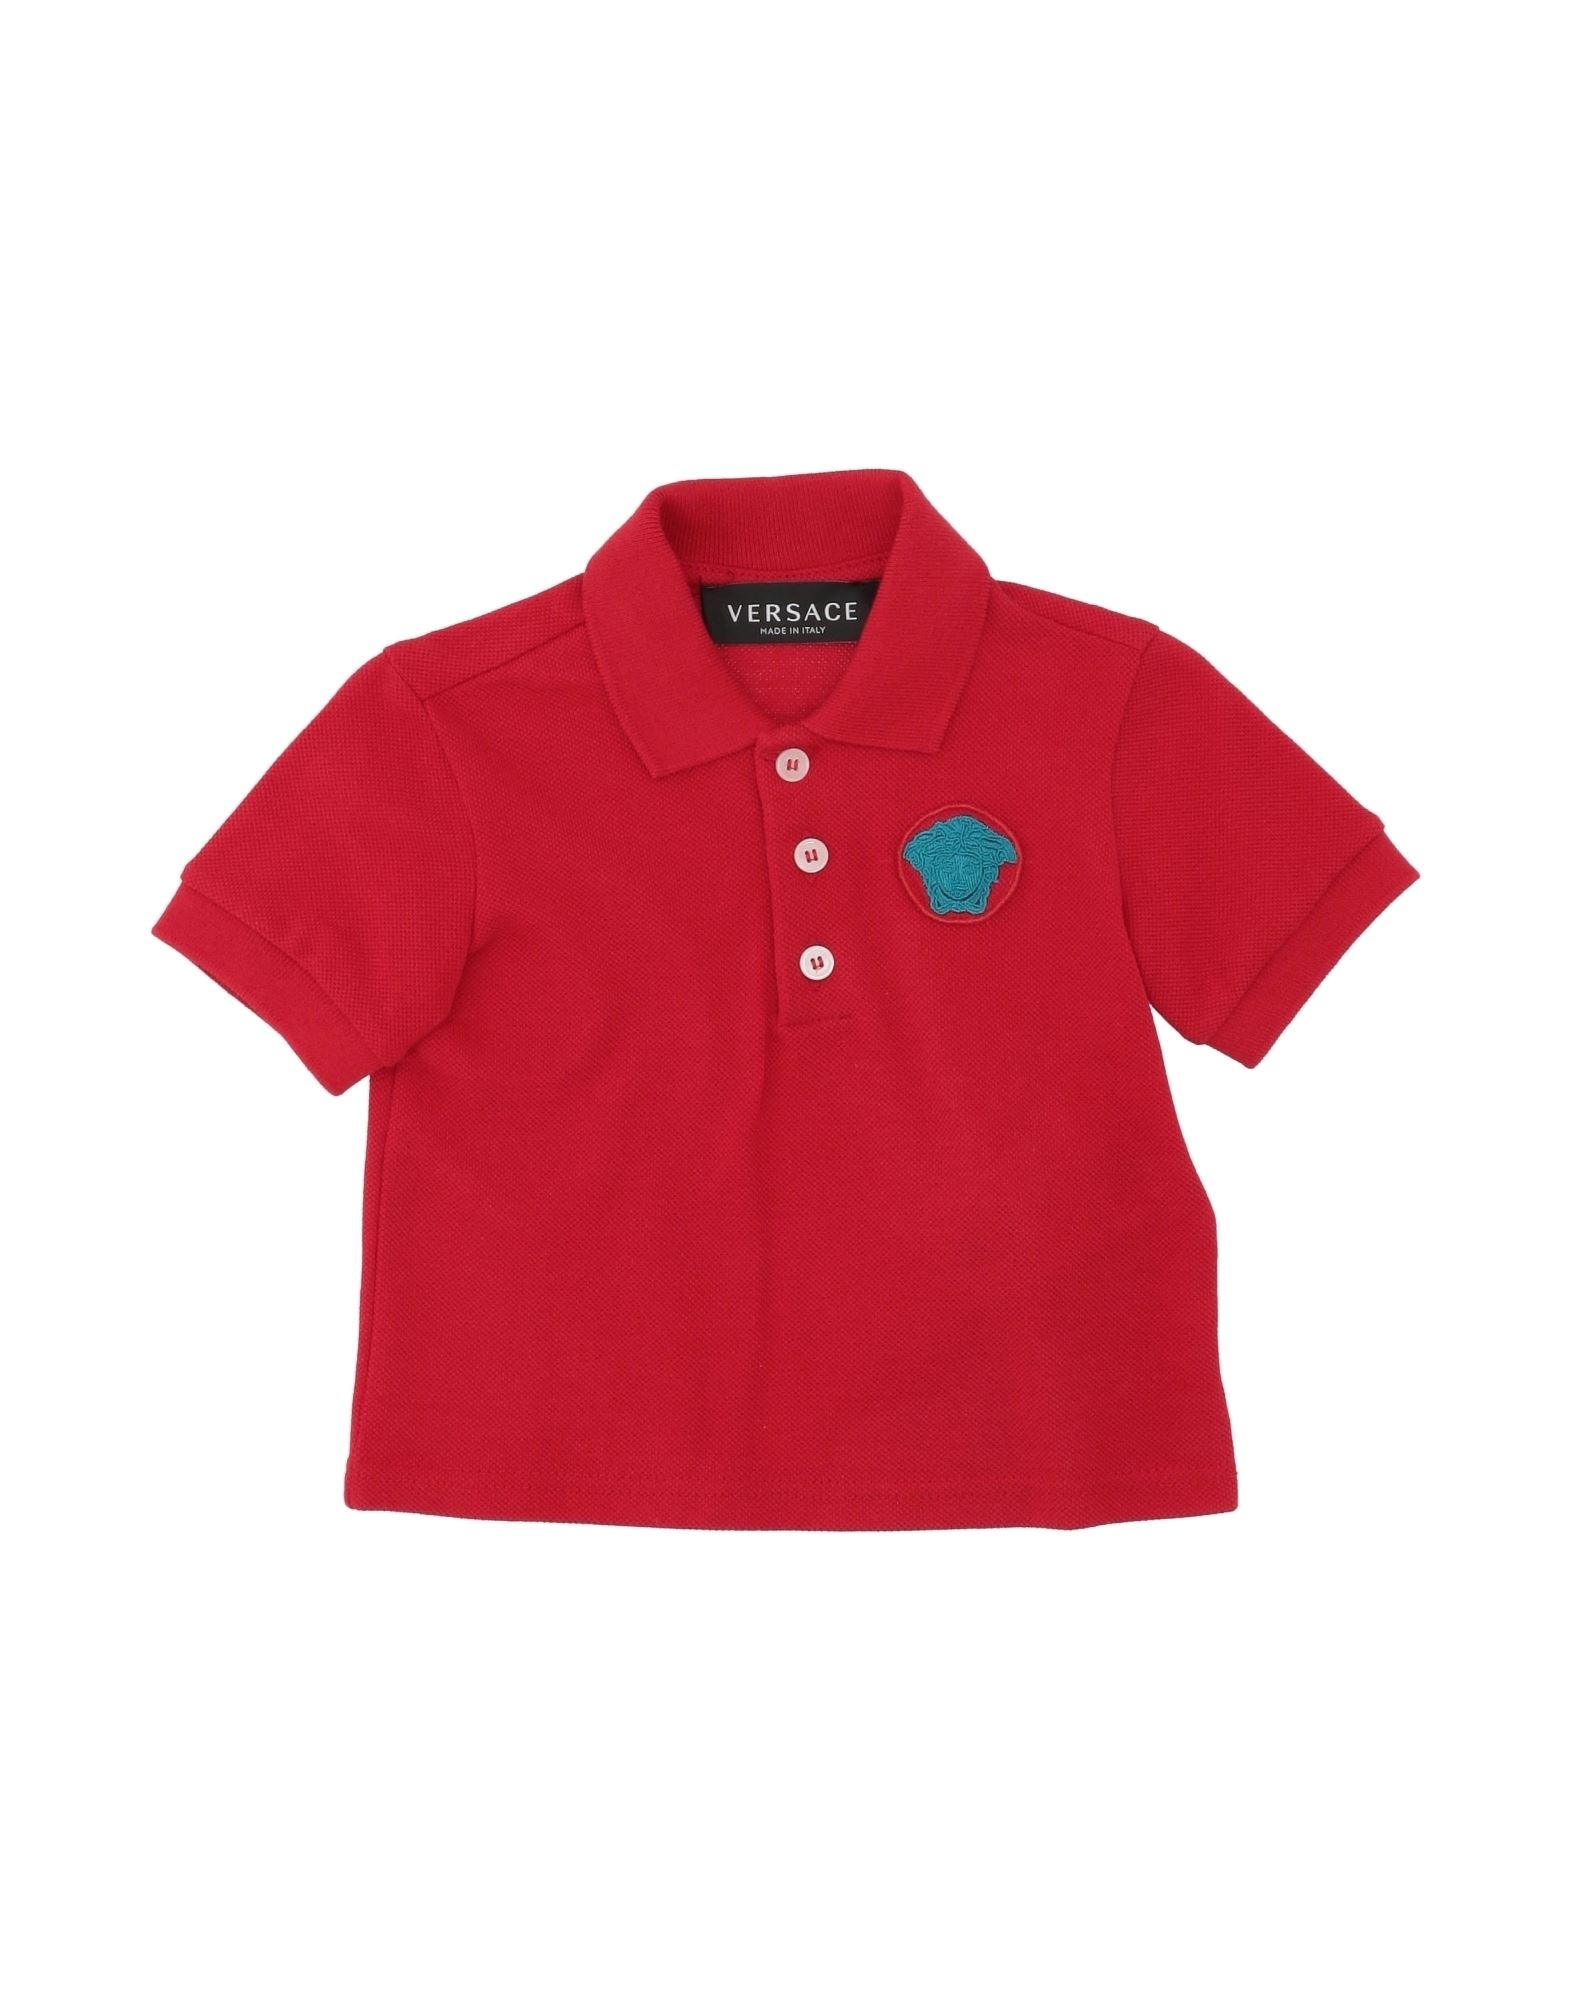 VERSACE YOUNG Poloshirt Kinder Rot von VERSACE YOUNG